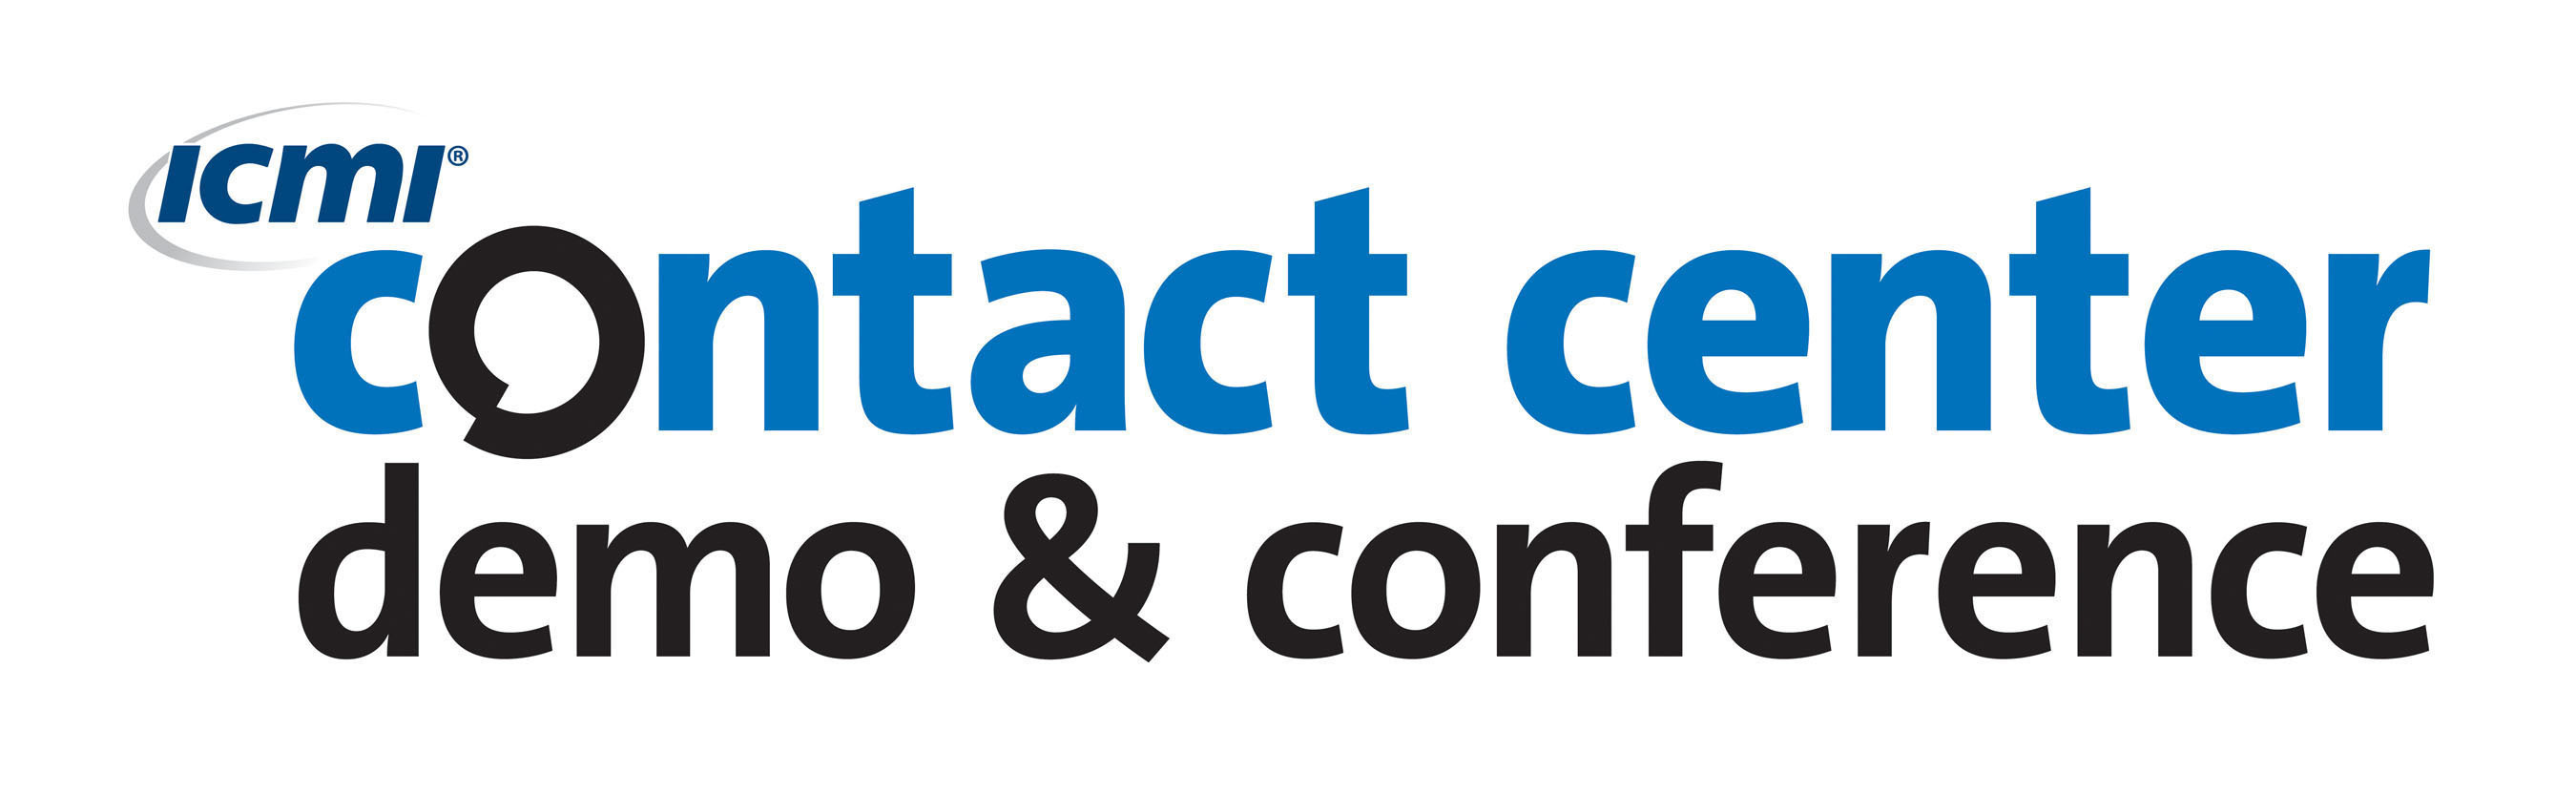 The ICMI Contact Center Demo and Conference will take place October 19-21 at the Rio Hotel in Las Vegas.